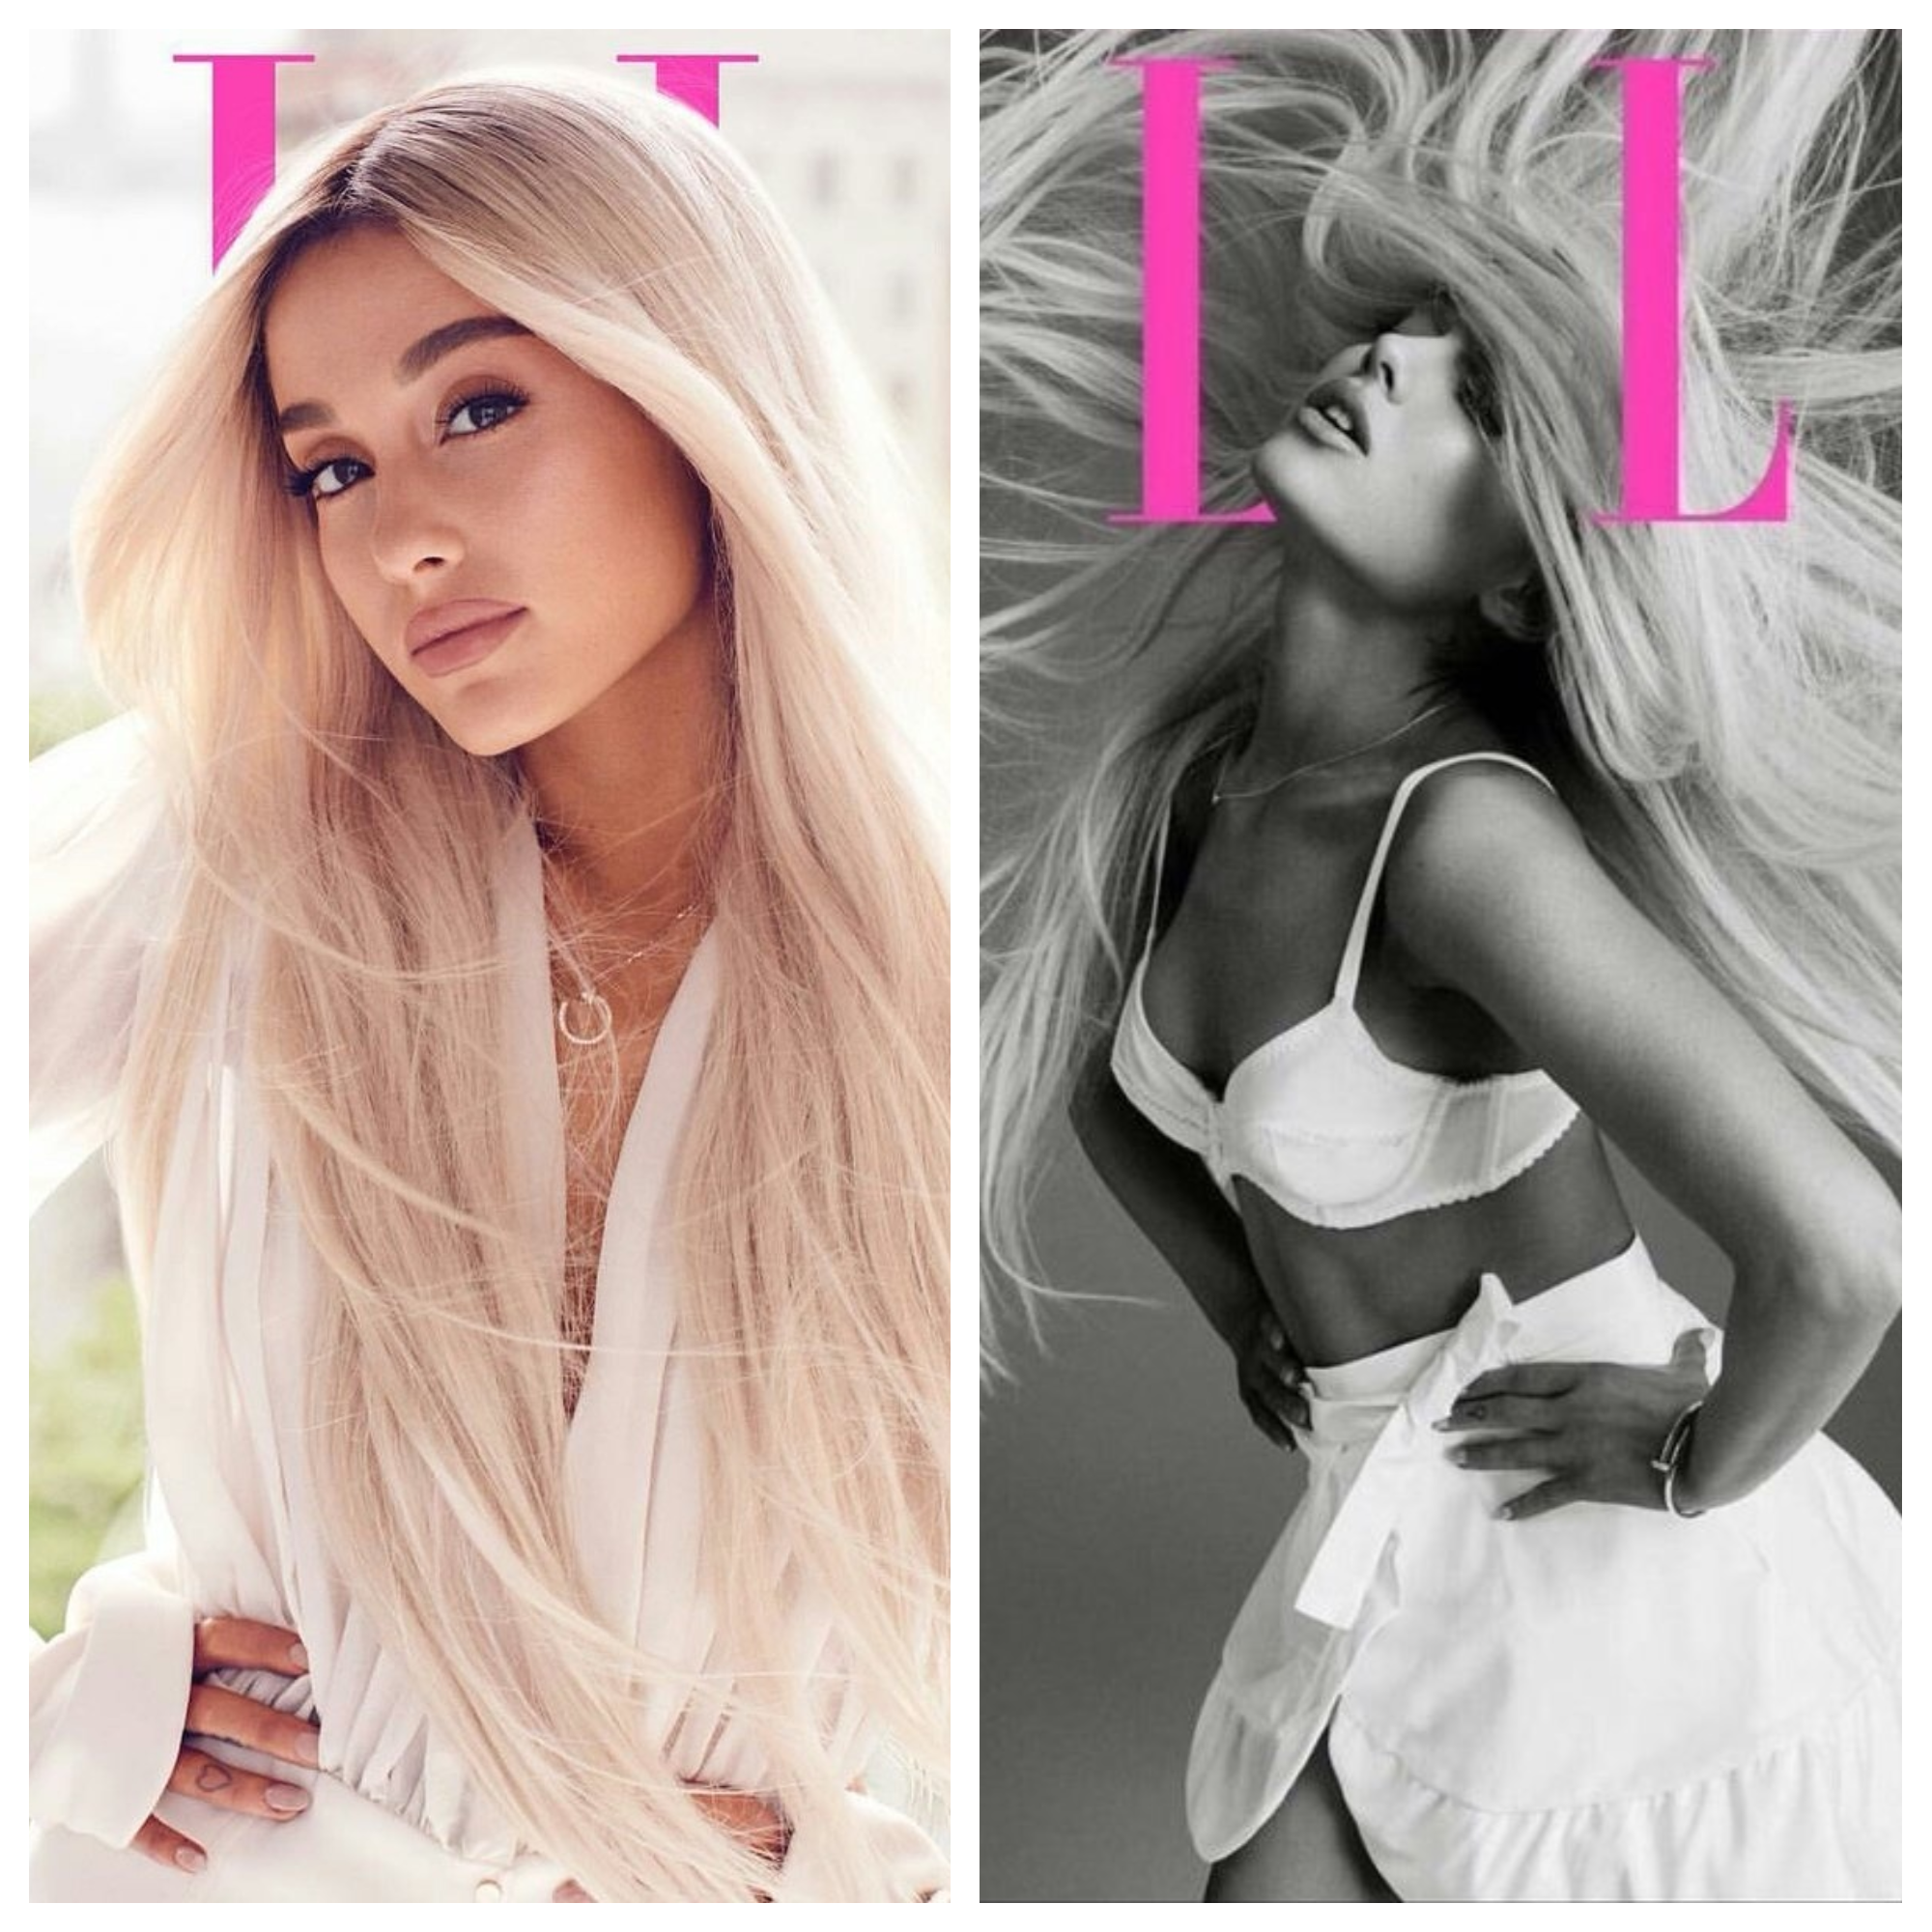 Ariana Grande makes for an arresting sight on the August cover of ELLE Maga...